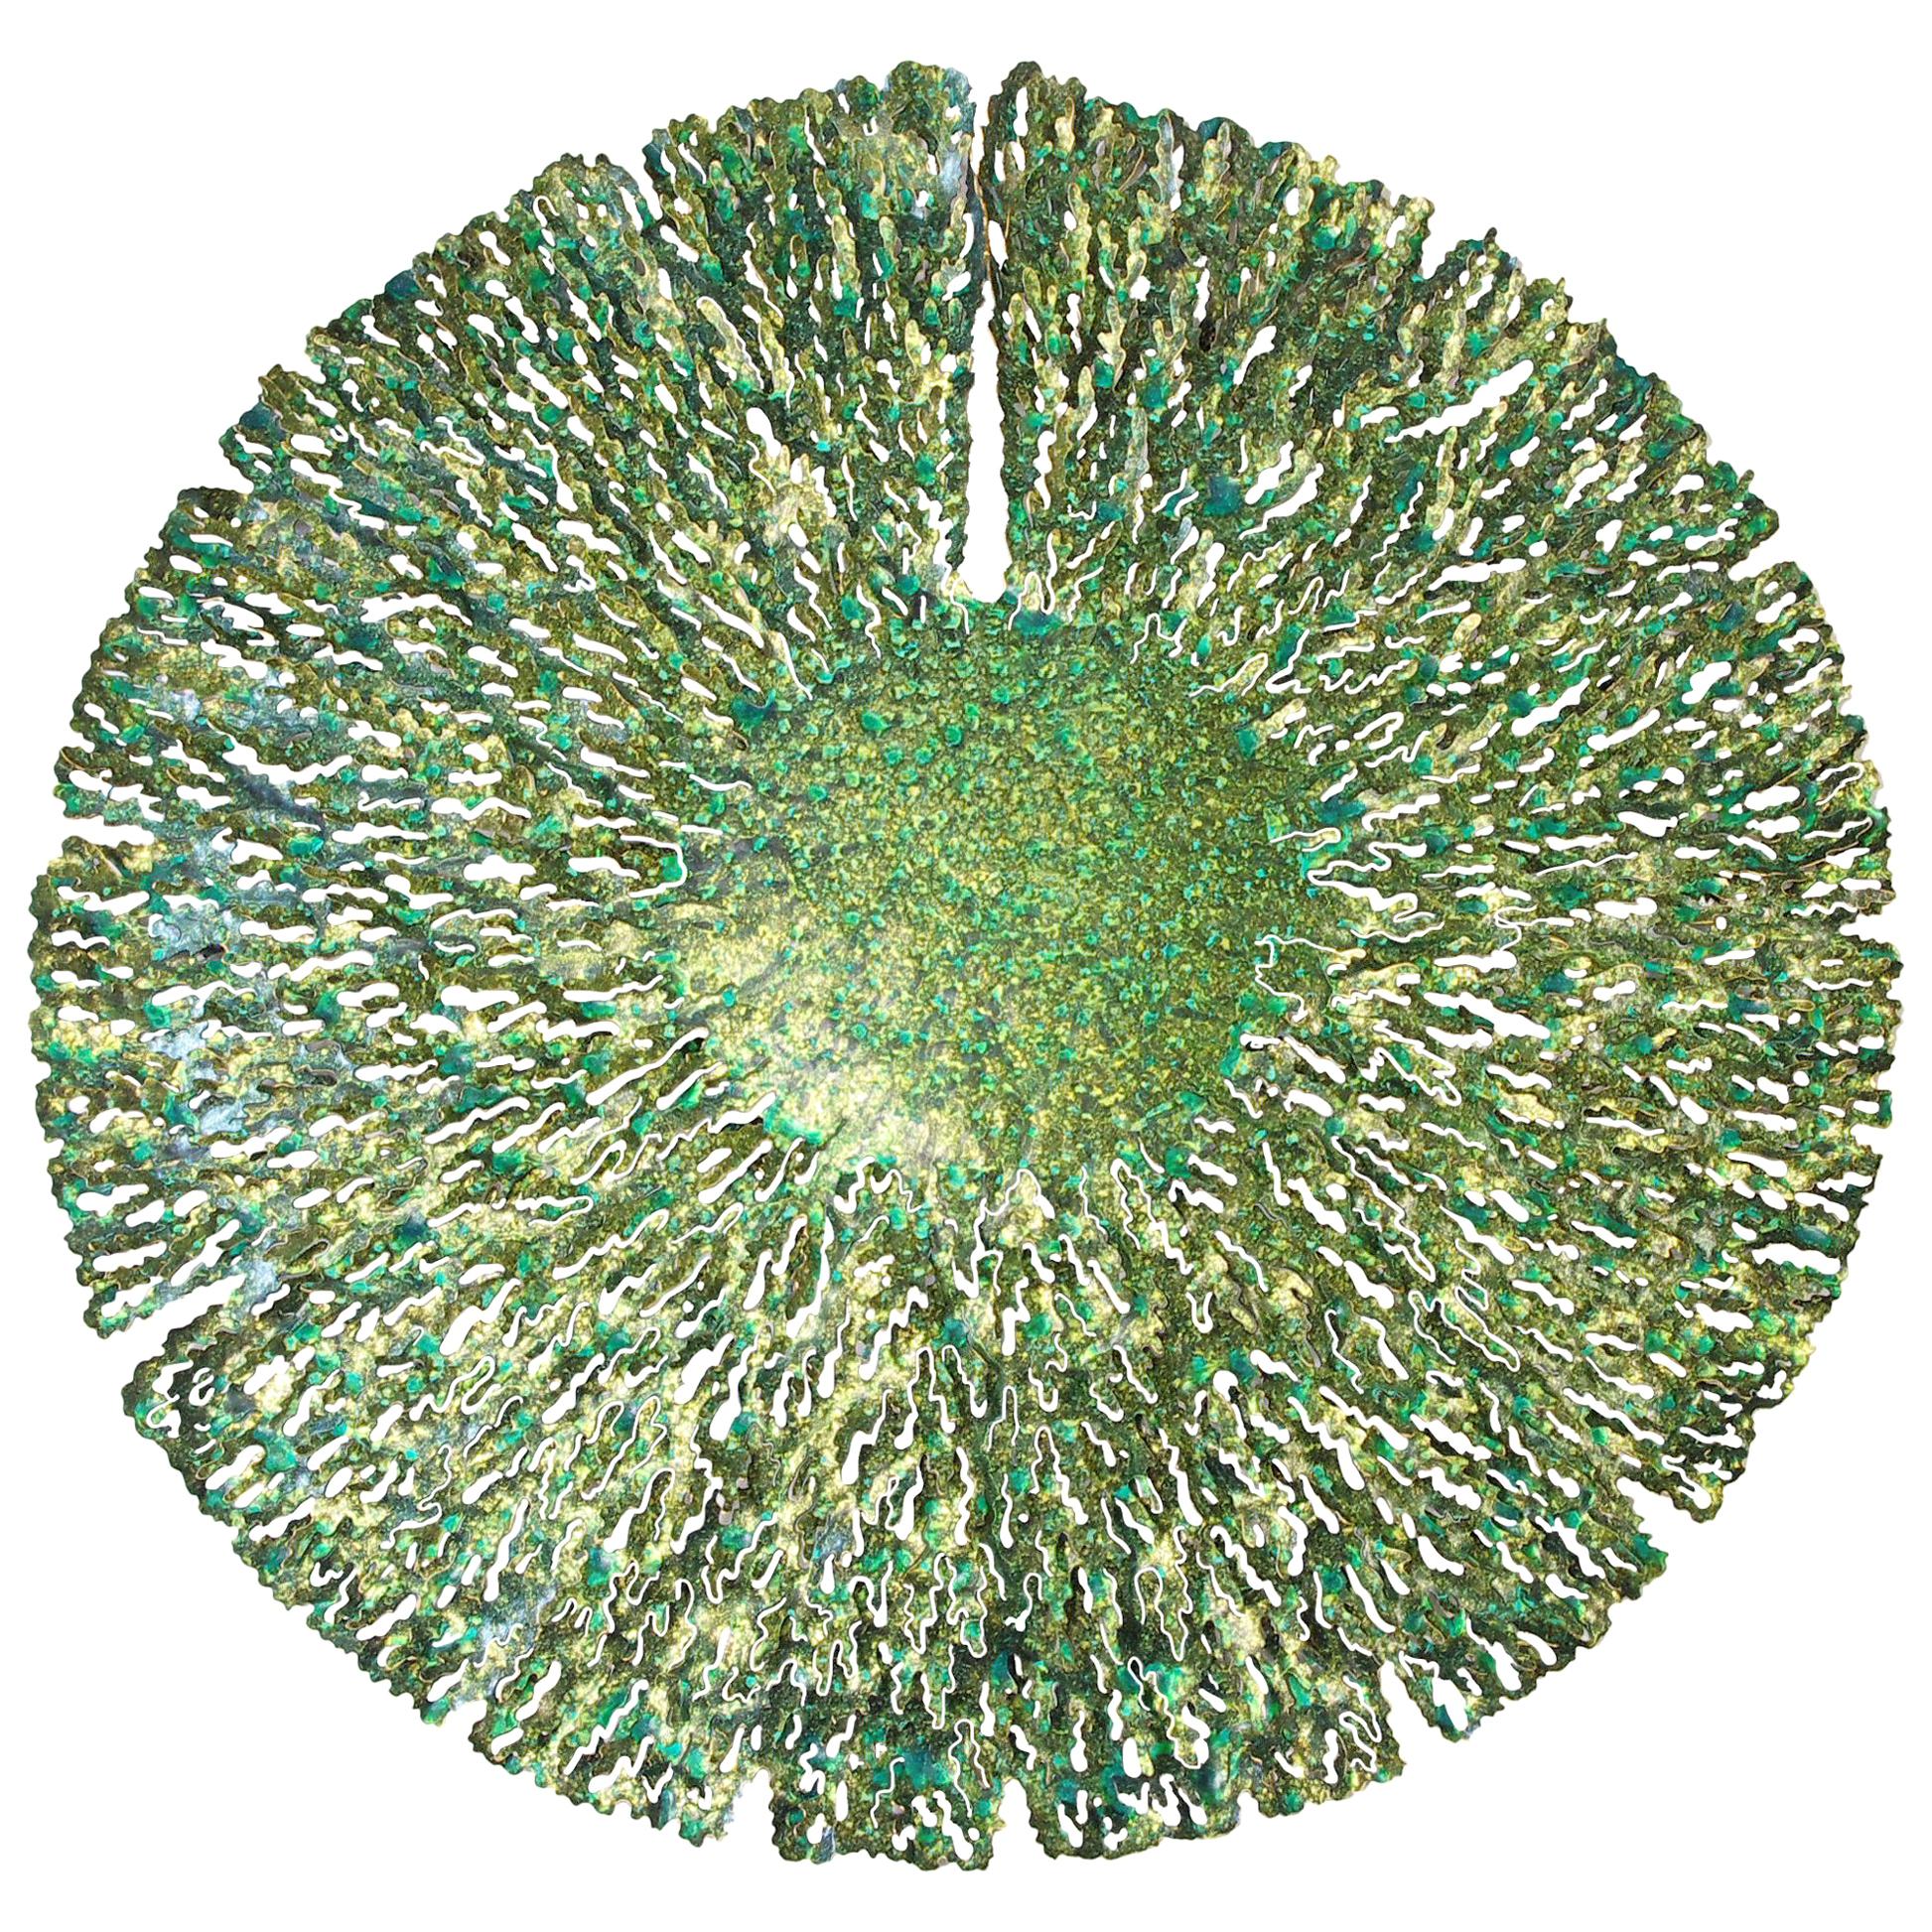 Green and Gold Iron Seaweed Wall Sculpture FINAL CLEARANCE SALE